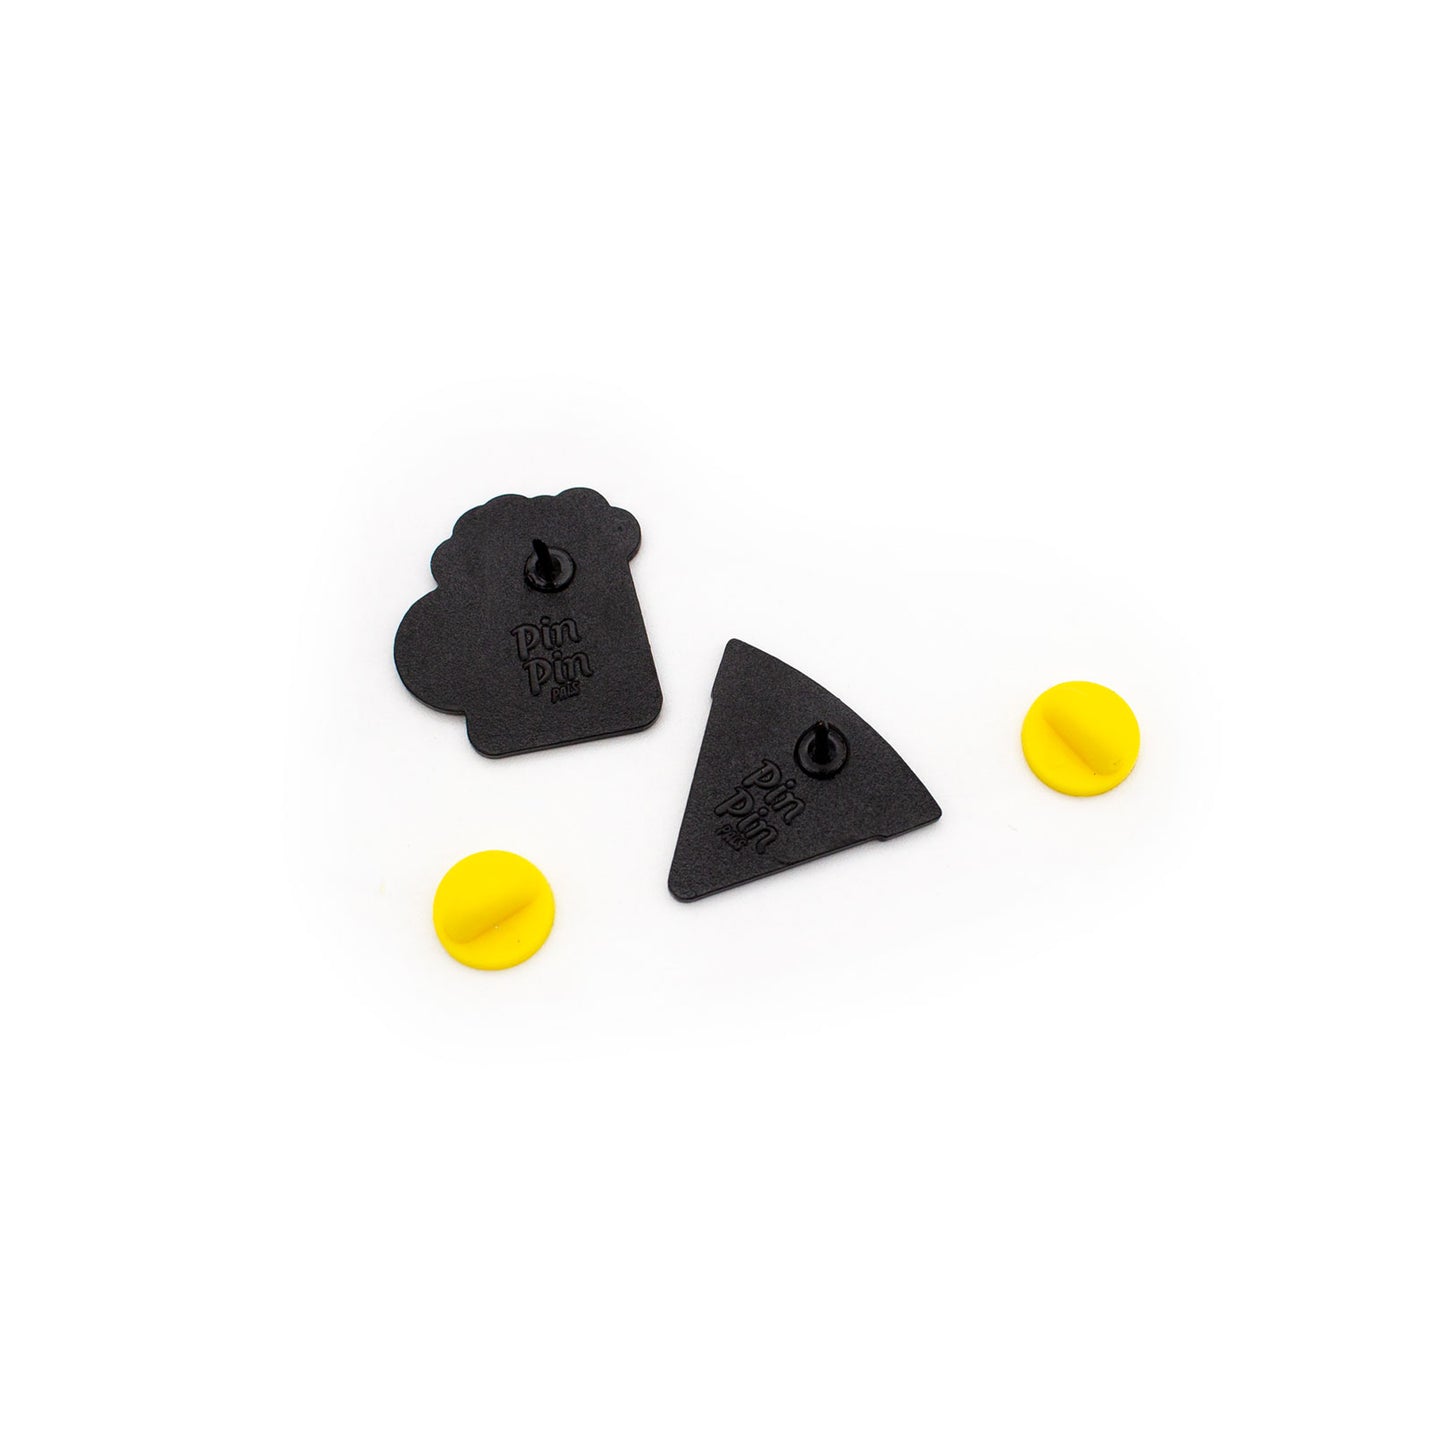 Backs of Pizza and Beer enamel pins with yellow rubber backings